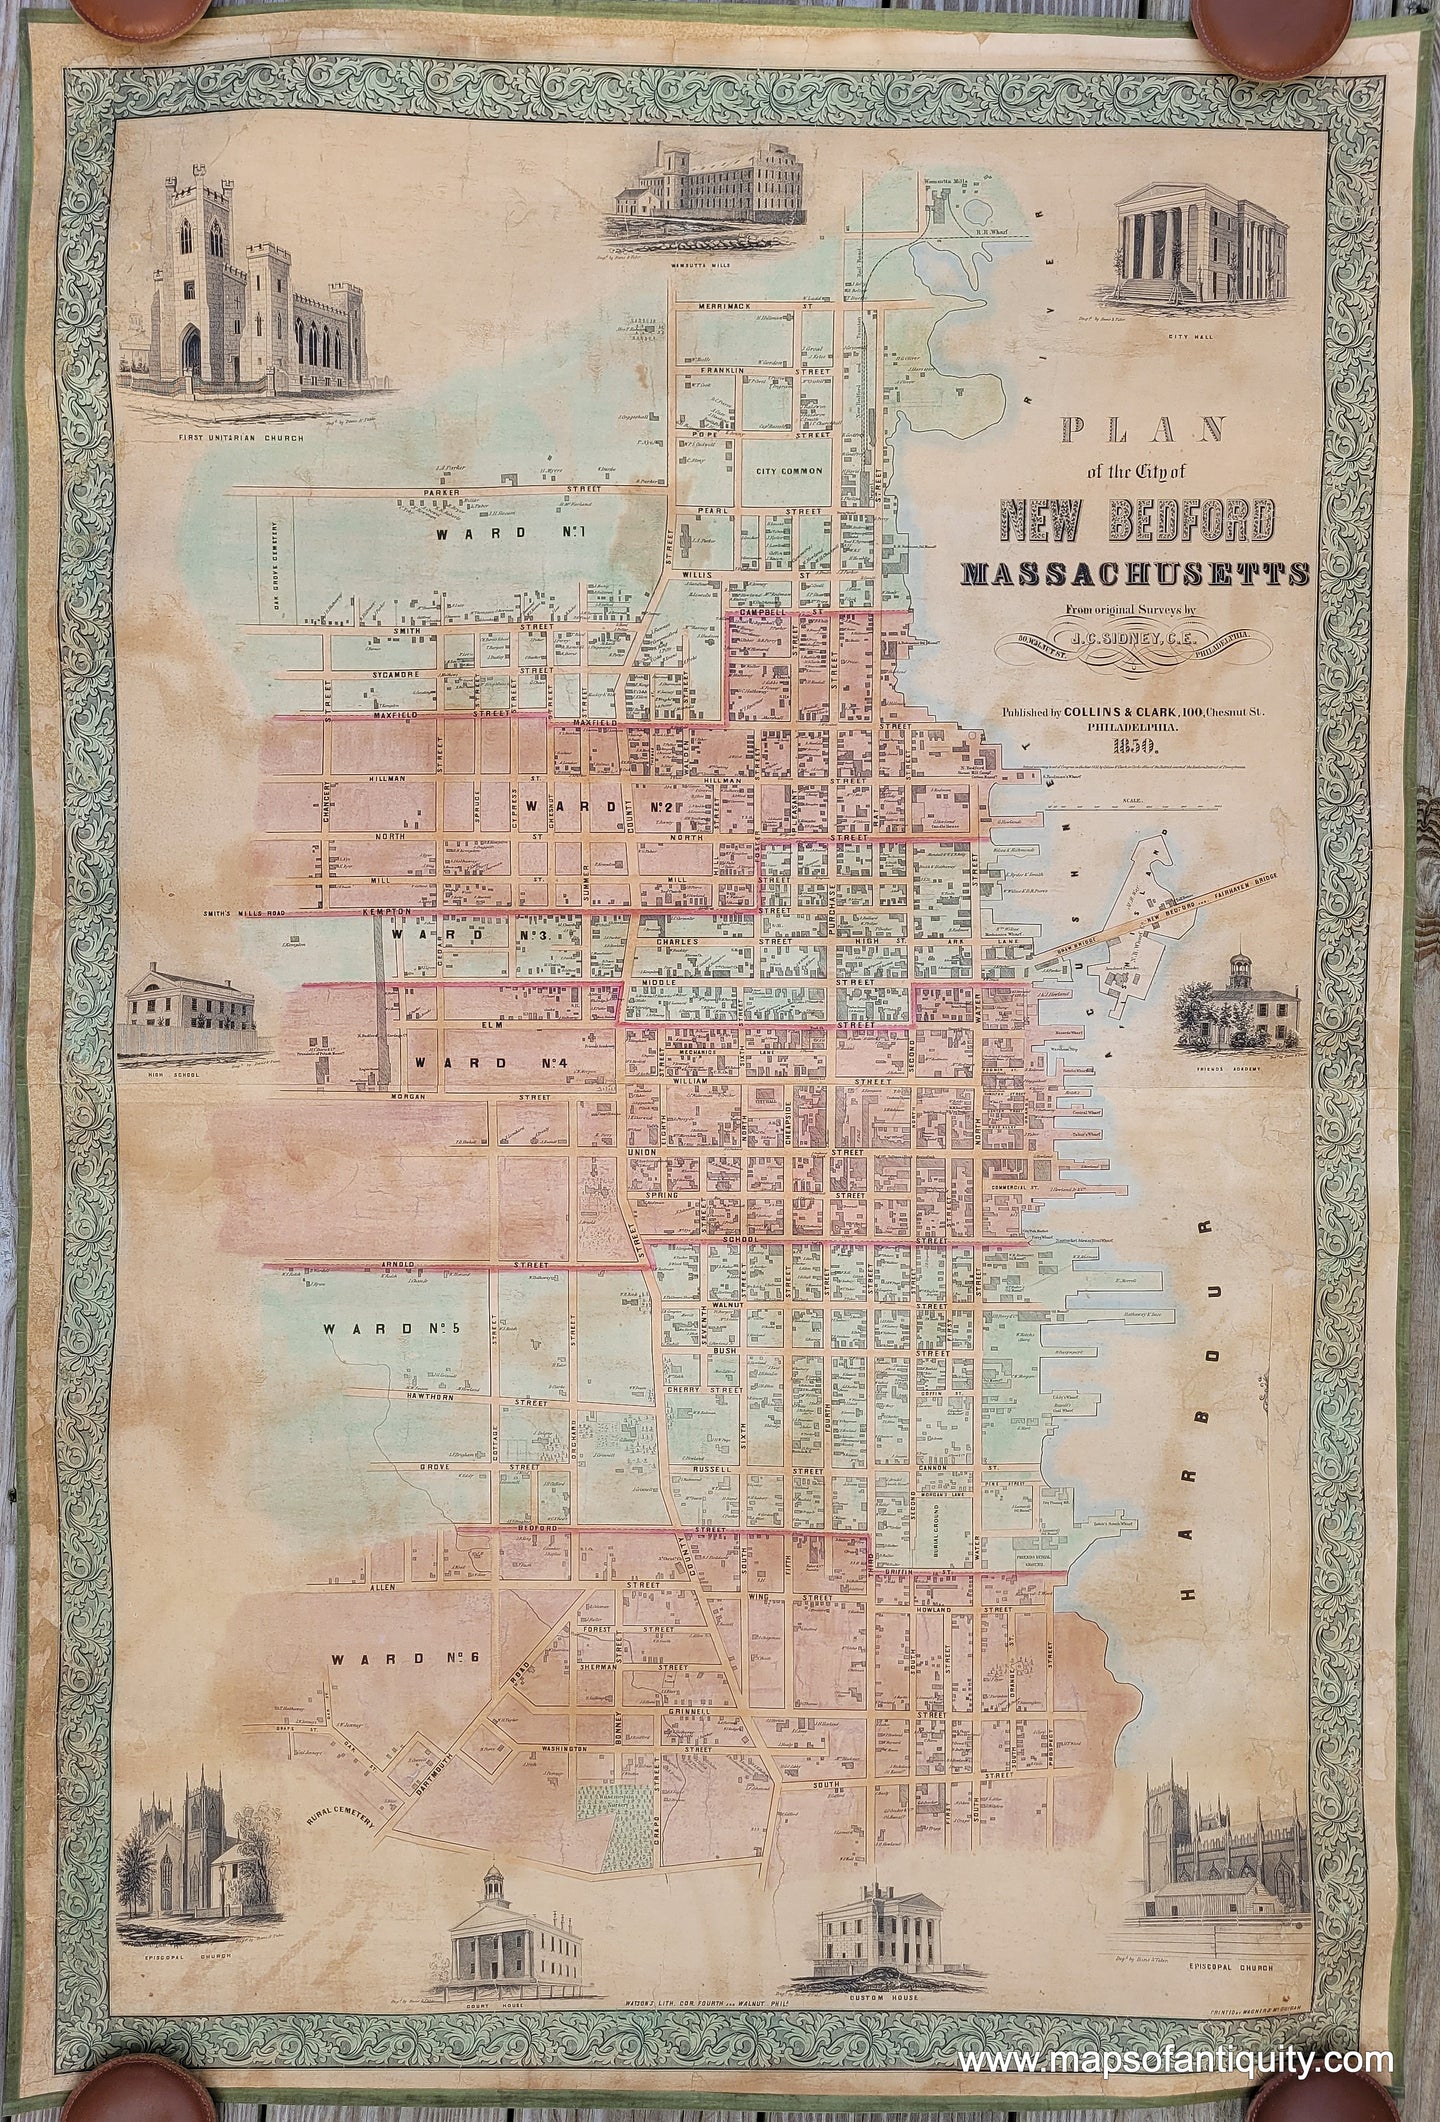 Genuine-Antique-Wall-Map-Plan-of-the-City-of-New-Bedford-Massachusetts-1850-Collins-Clark-Restored-Cleaned-Maps-Of-Antiquity